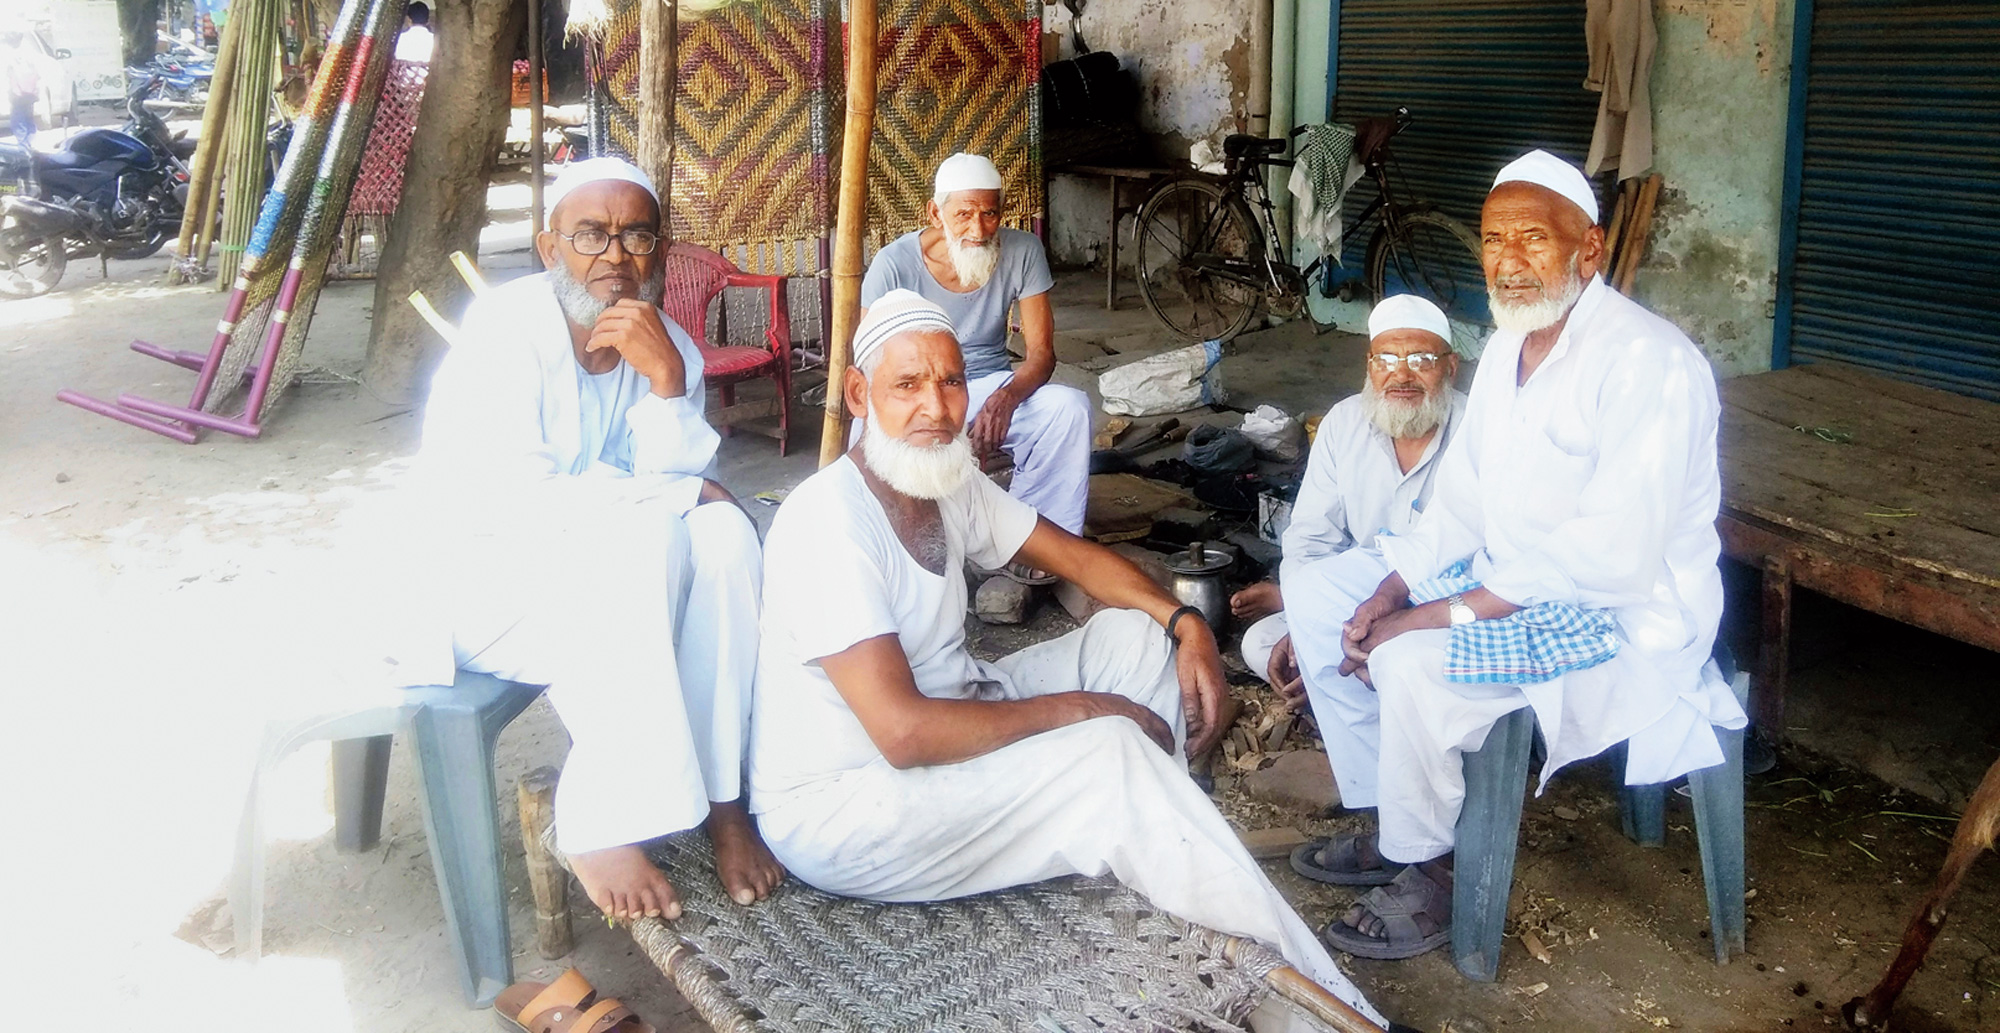 Achchhe din means: To remain alive, says Aligarh voter